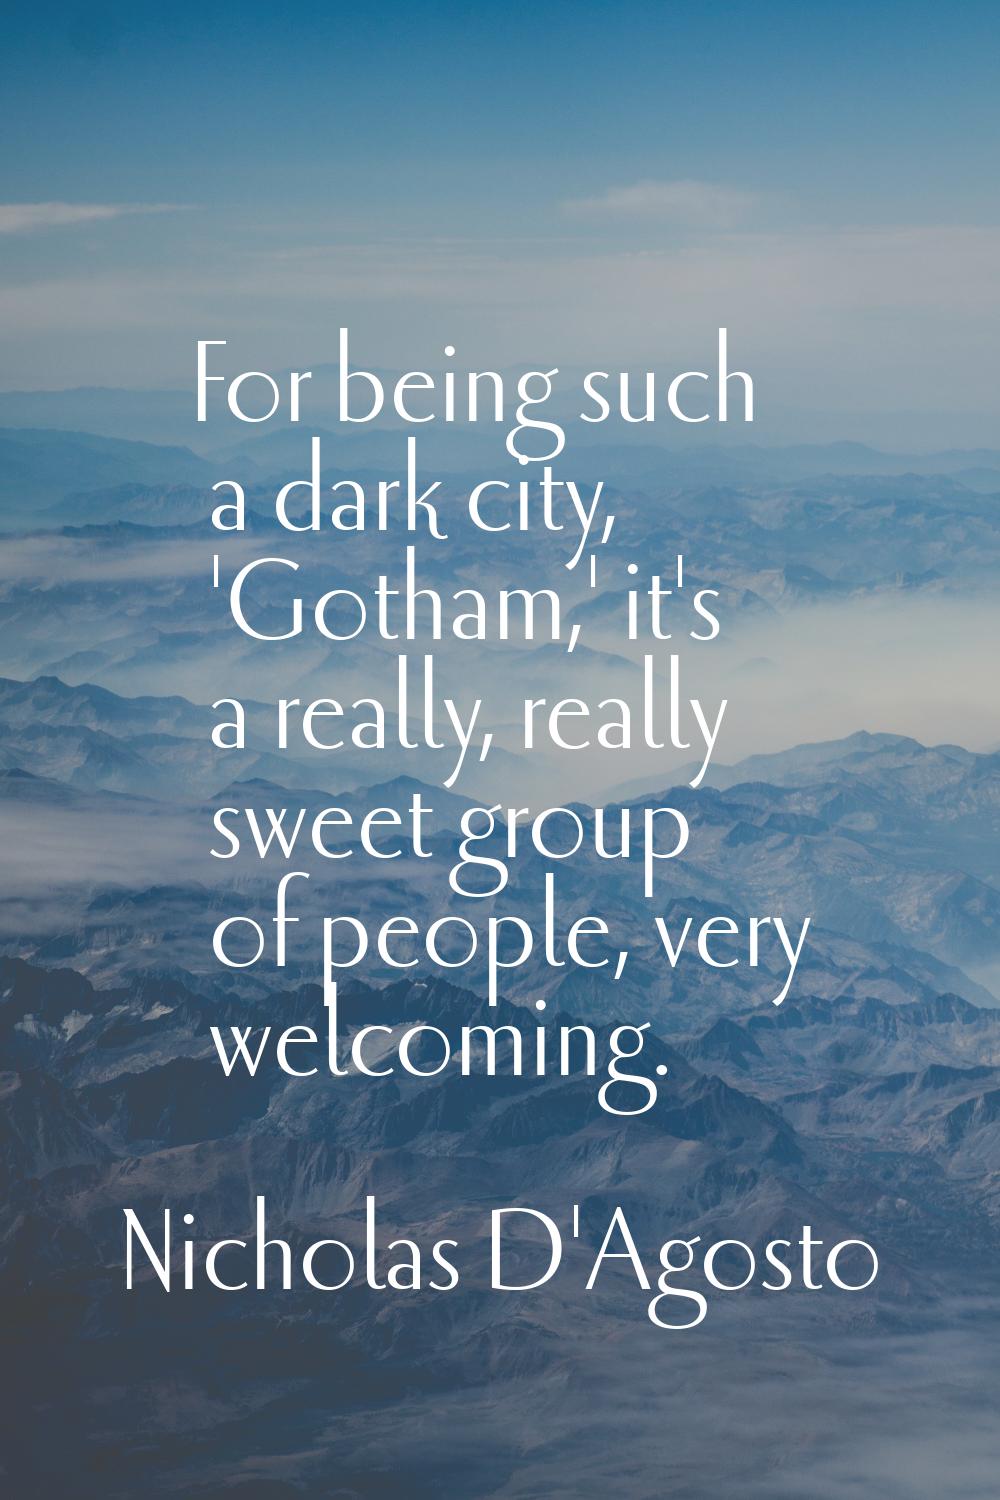 For being such a dark city, 'Gotham,' it's a really, really sweet group of people, very welcoming.